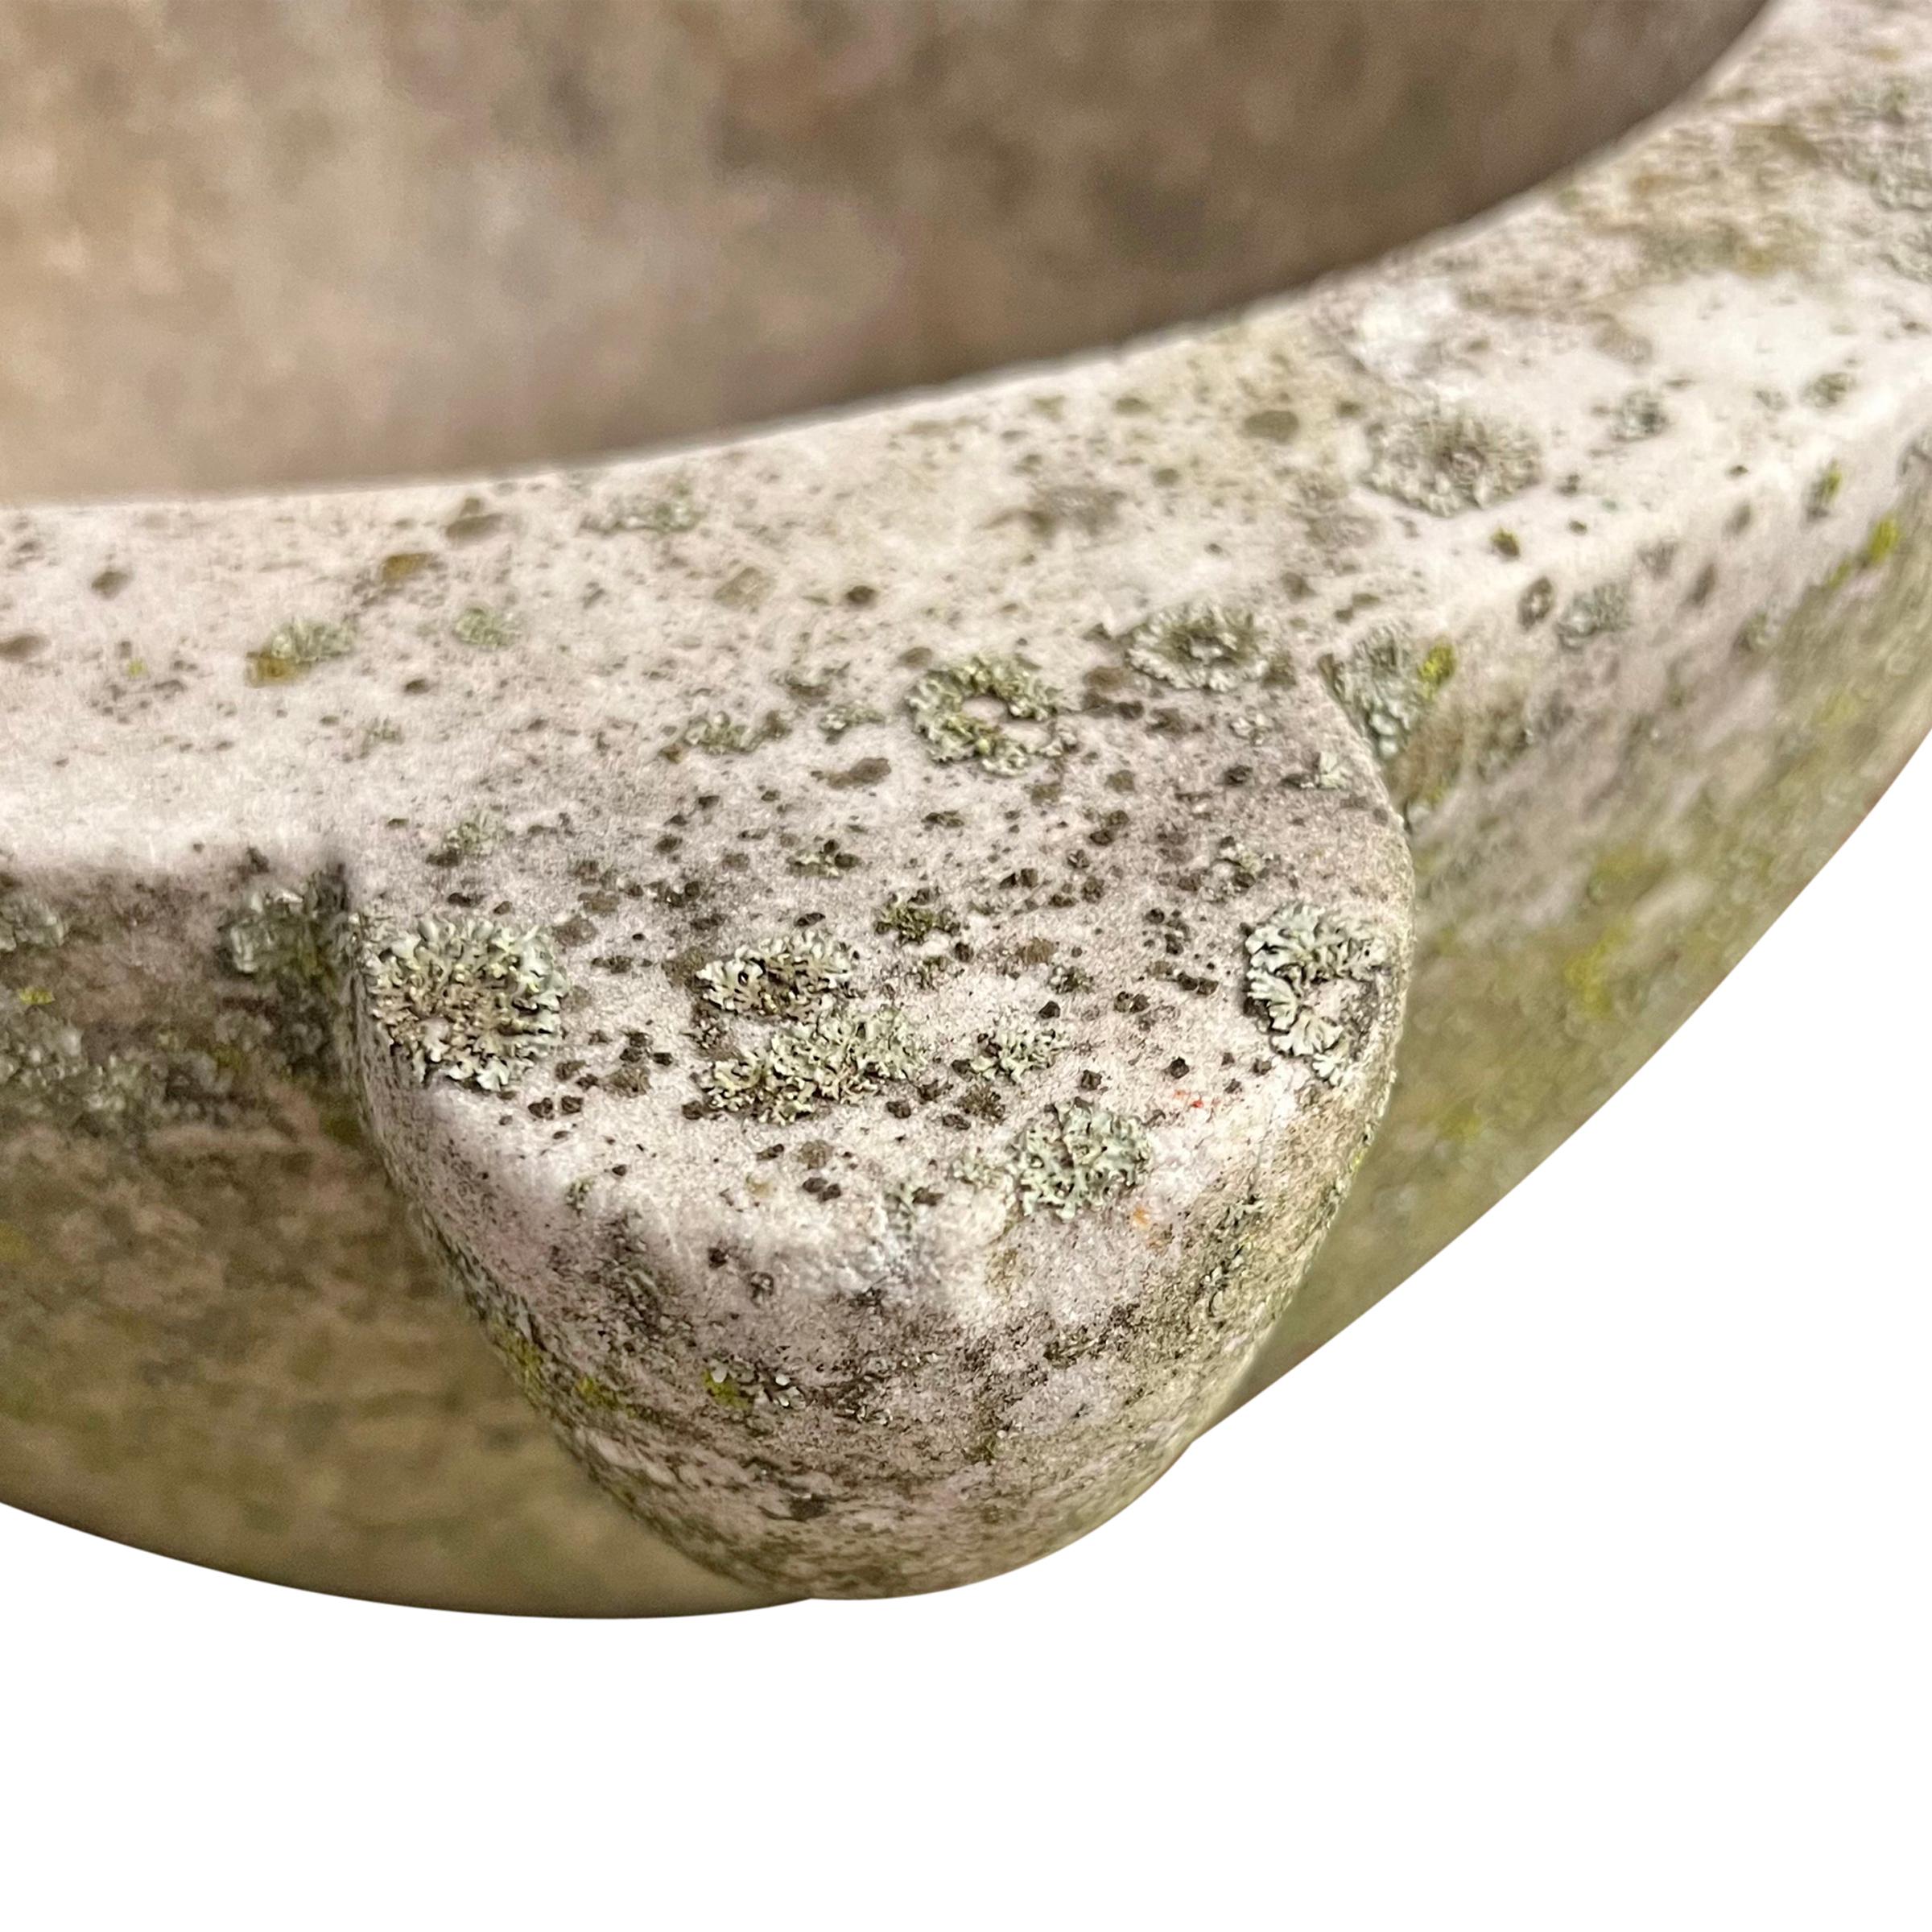 19th Century French Moss and Lichen Covered Marble Mortar For Sale 4